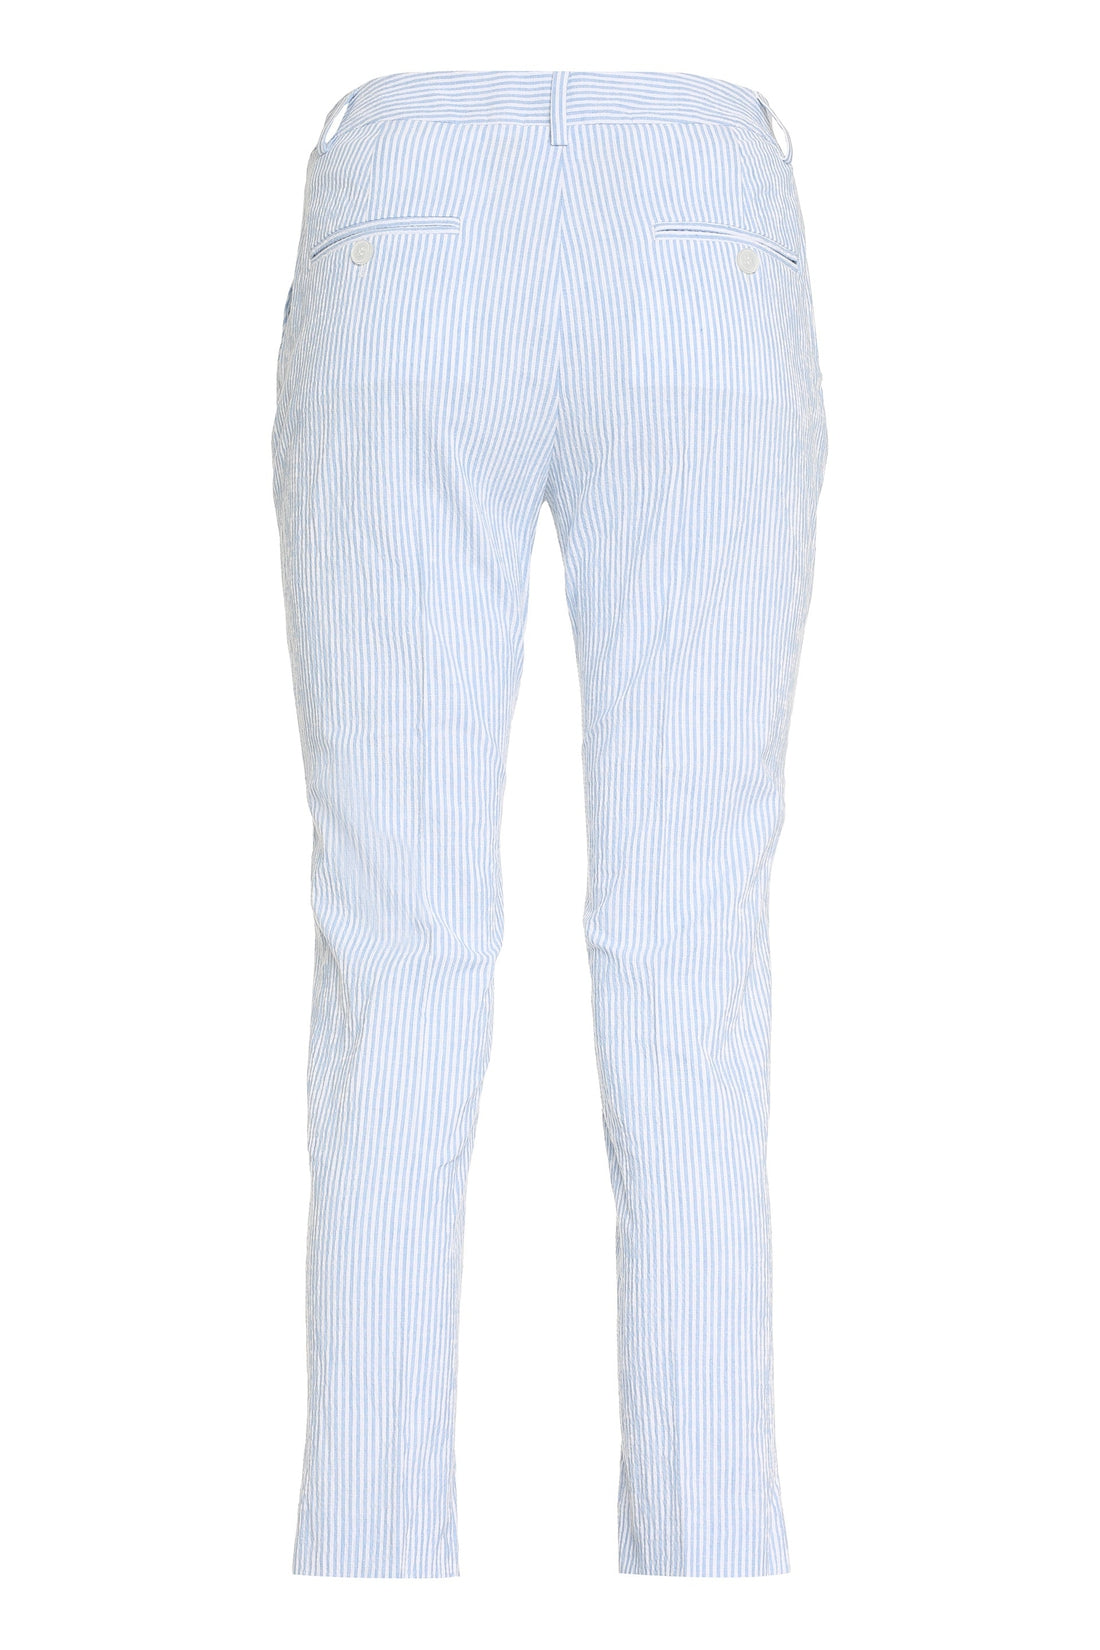 Weekend Max Mara-OUTLET-SALE-Starlet trousers in cotton and linen-ARCHIVIST